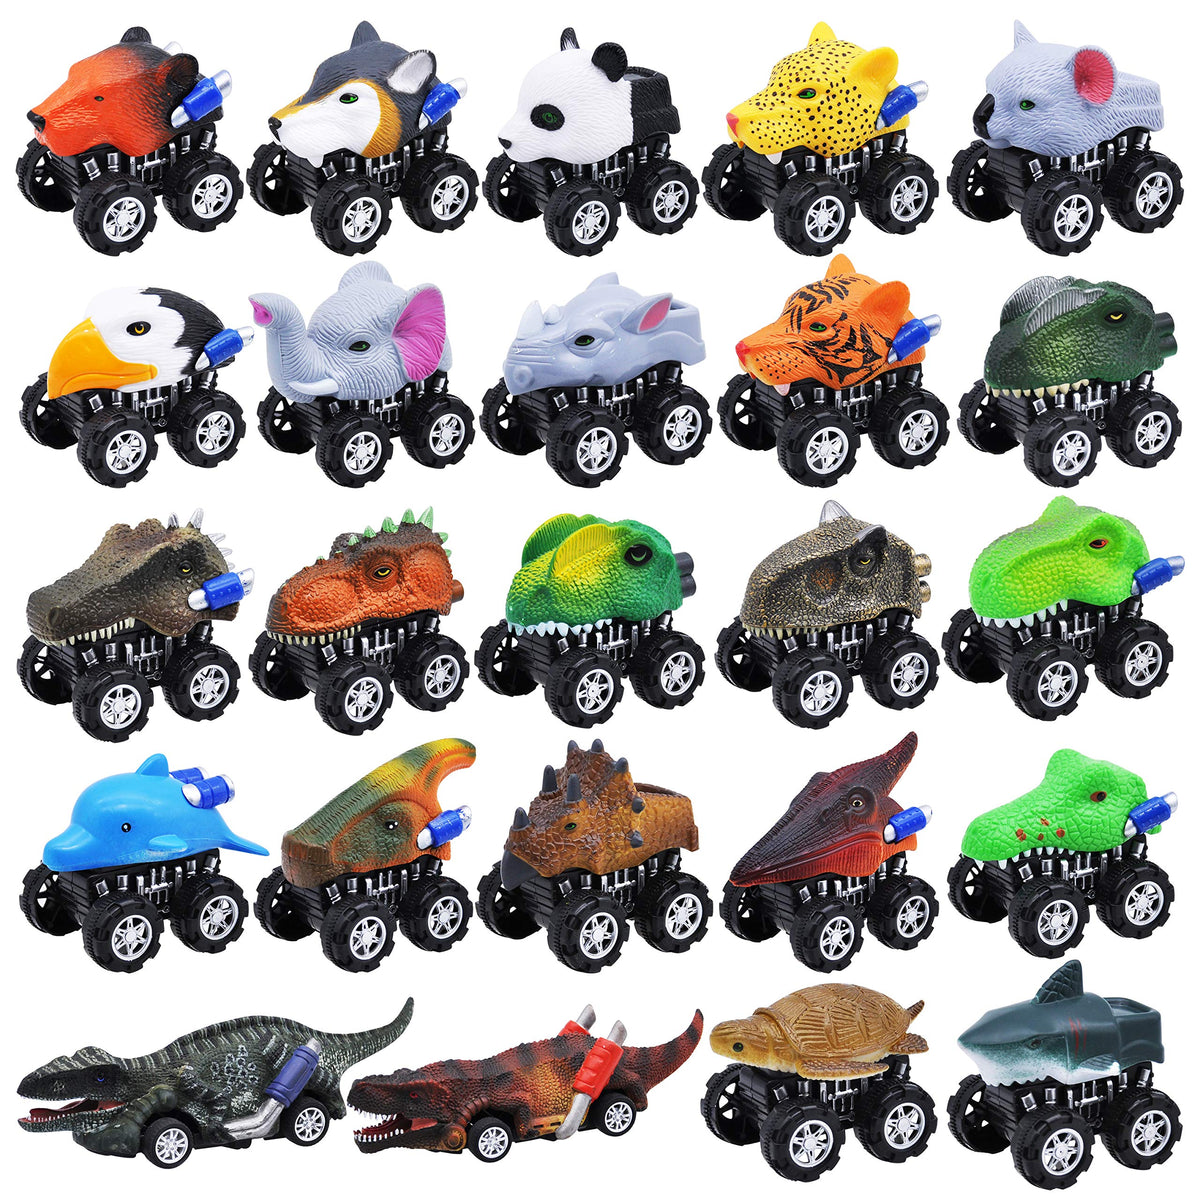 https://www.joyinusa.shop/wp-content/uploads/1692/00/visit-our-website-to-see-the-newest-the-christmas-advent-calendar-with-monster-truck-toys-set-joyin-unique-designs-that-you-cant-find-in-any-other-place_1.jpg